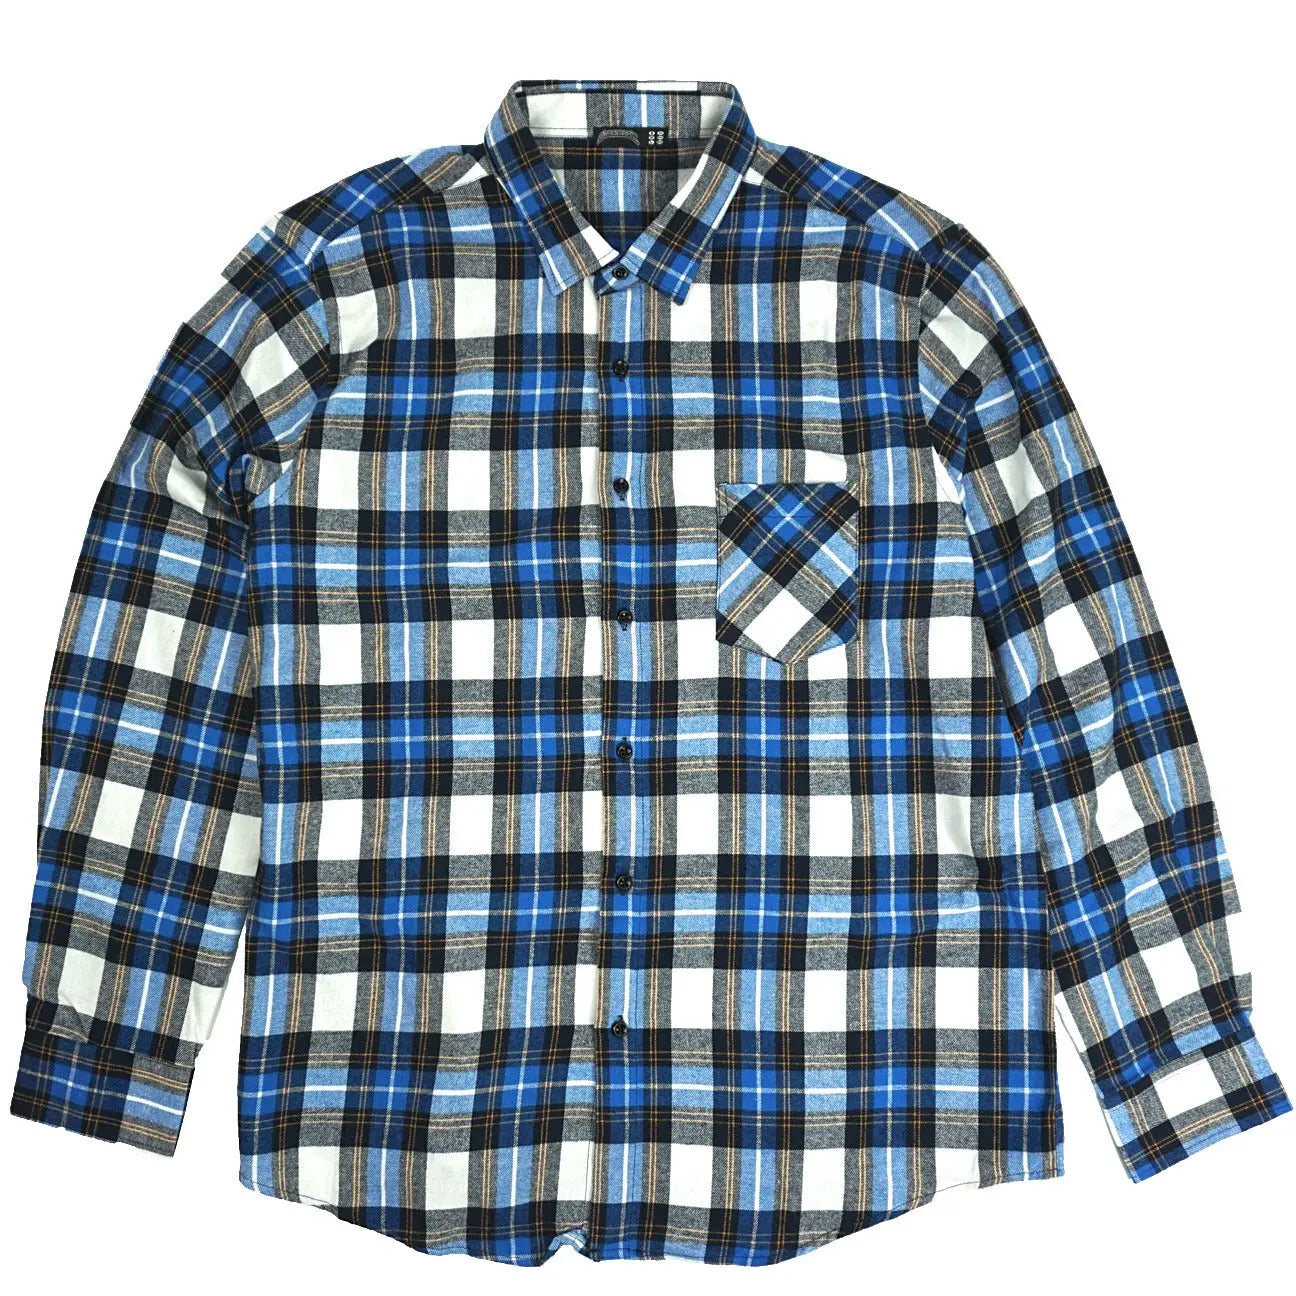 Front view of Blue, Yellow, Black and White Plaid Flannel by Dumbsmart New York